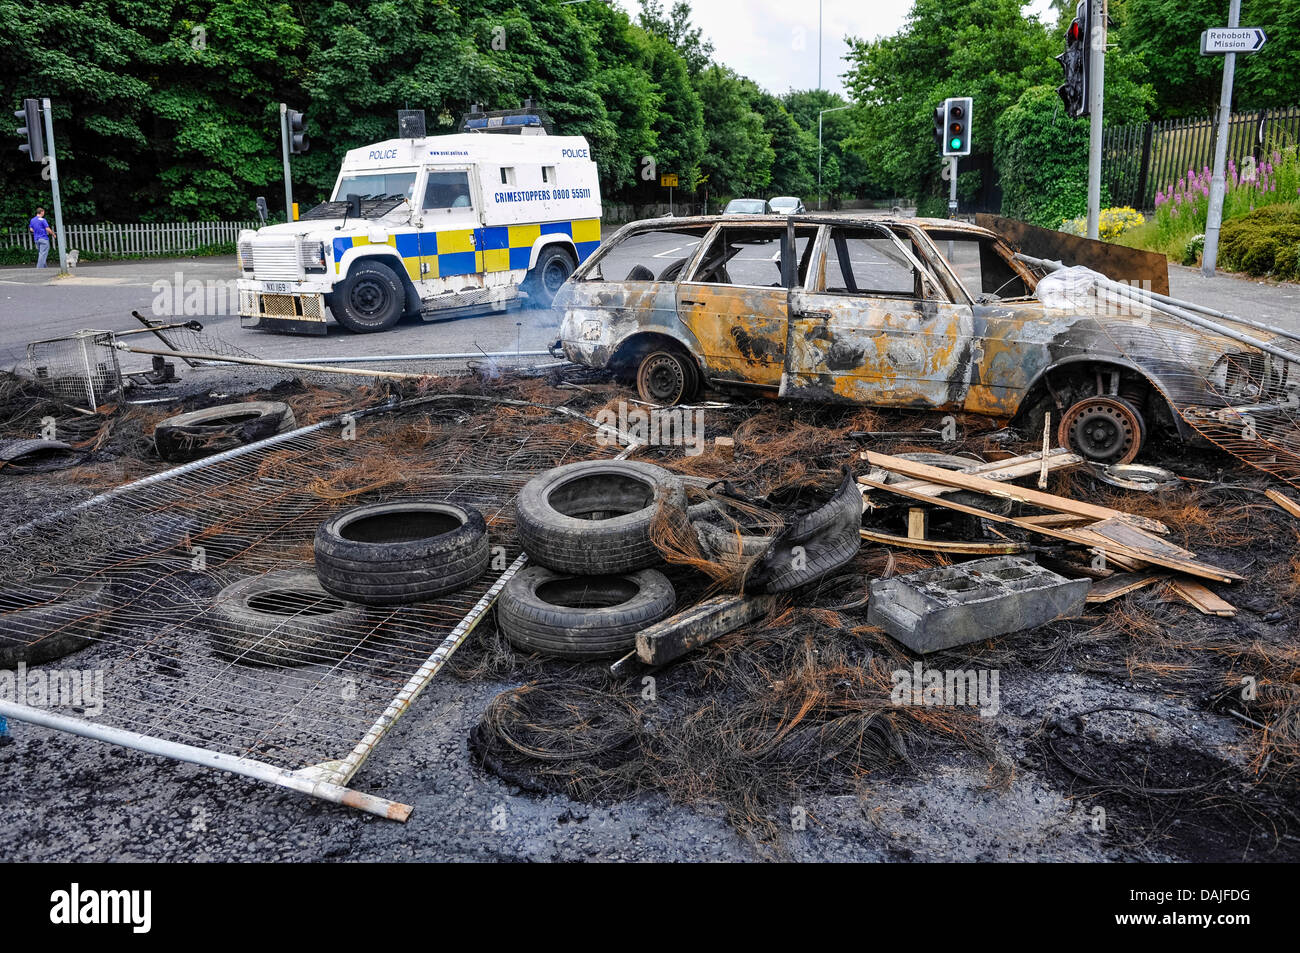 Belfast, Northern Ireland. 15th July 2013 - A police Landrover diverts traffic away from debris following a night of rioting in Belfast Stock Photo